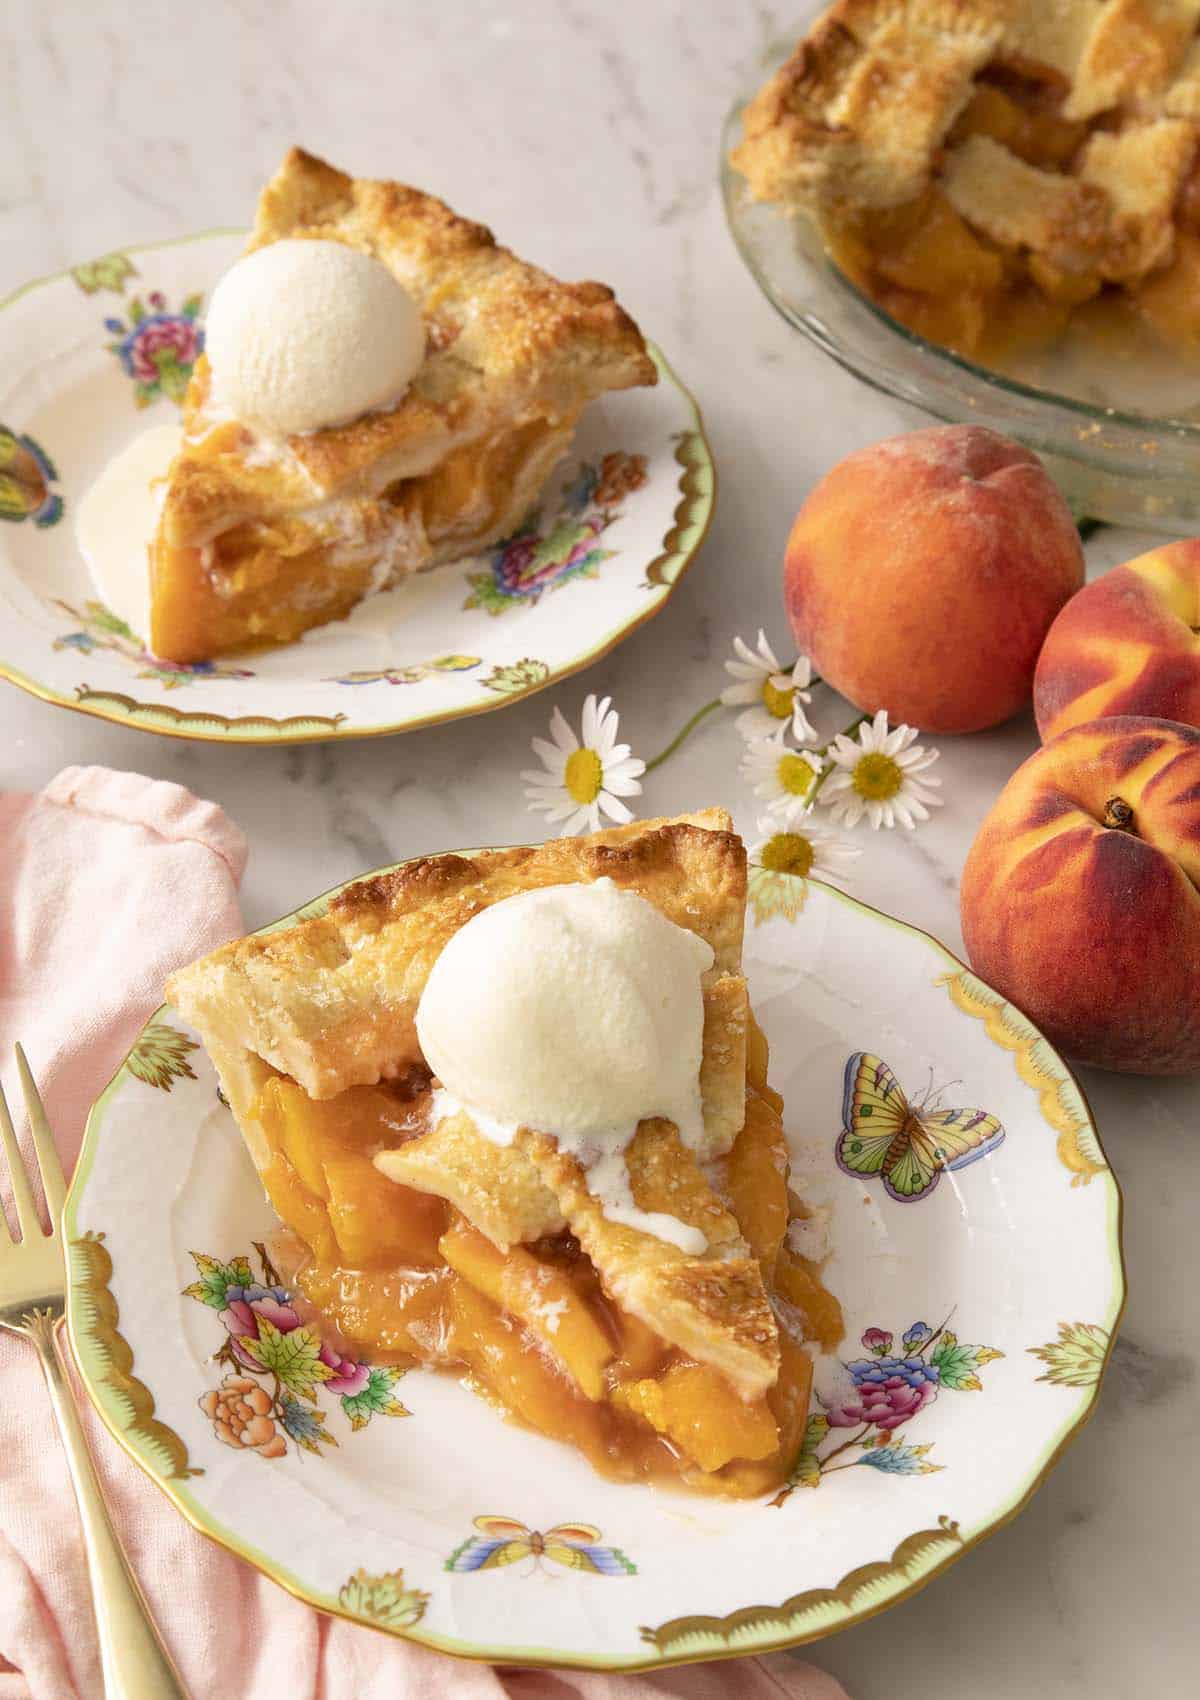 Two pieces of peach pie on porcelain plates with ice cream.